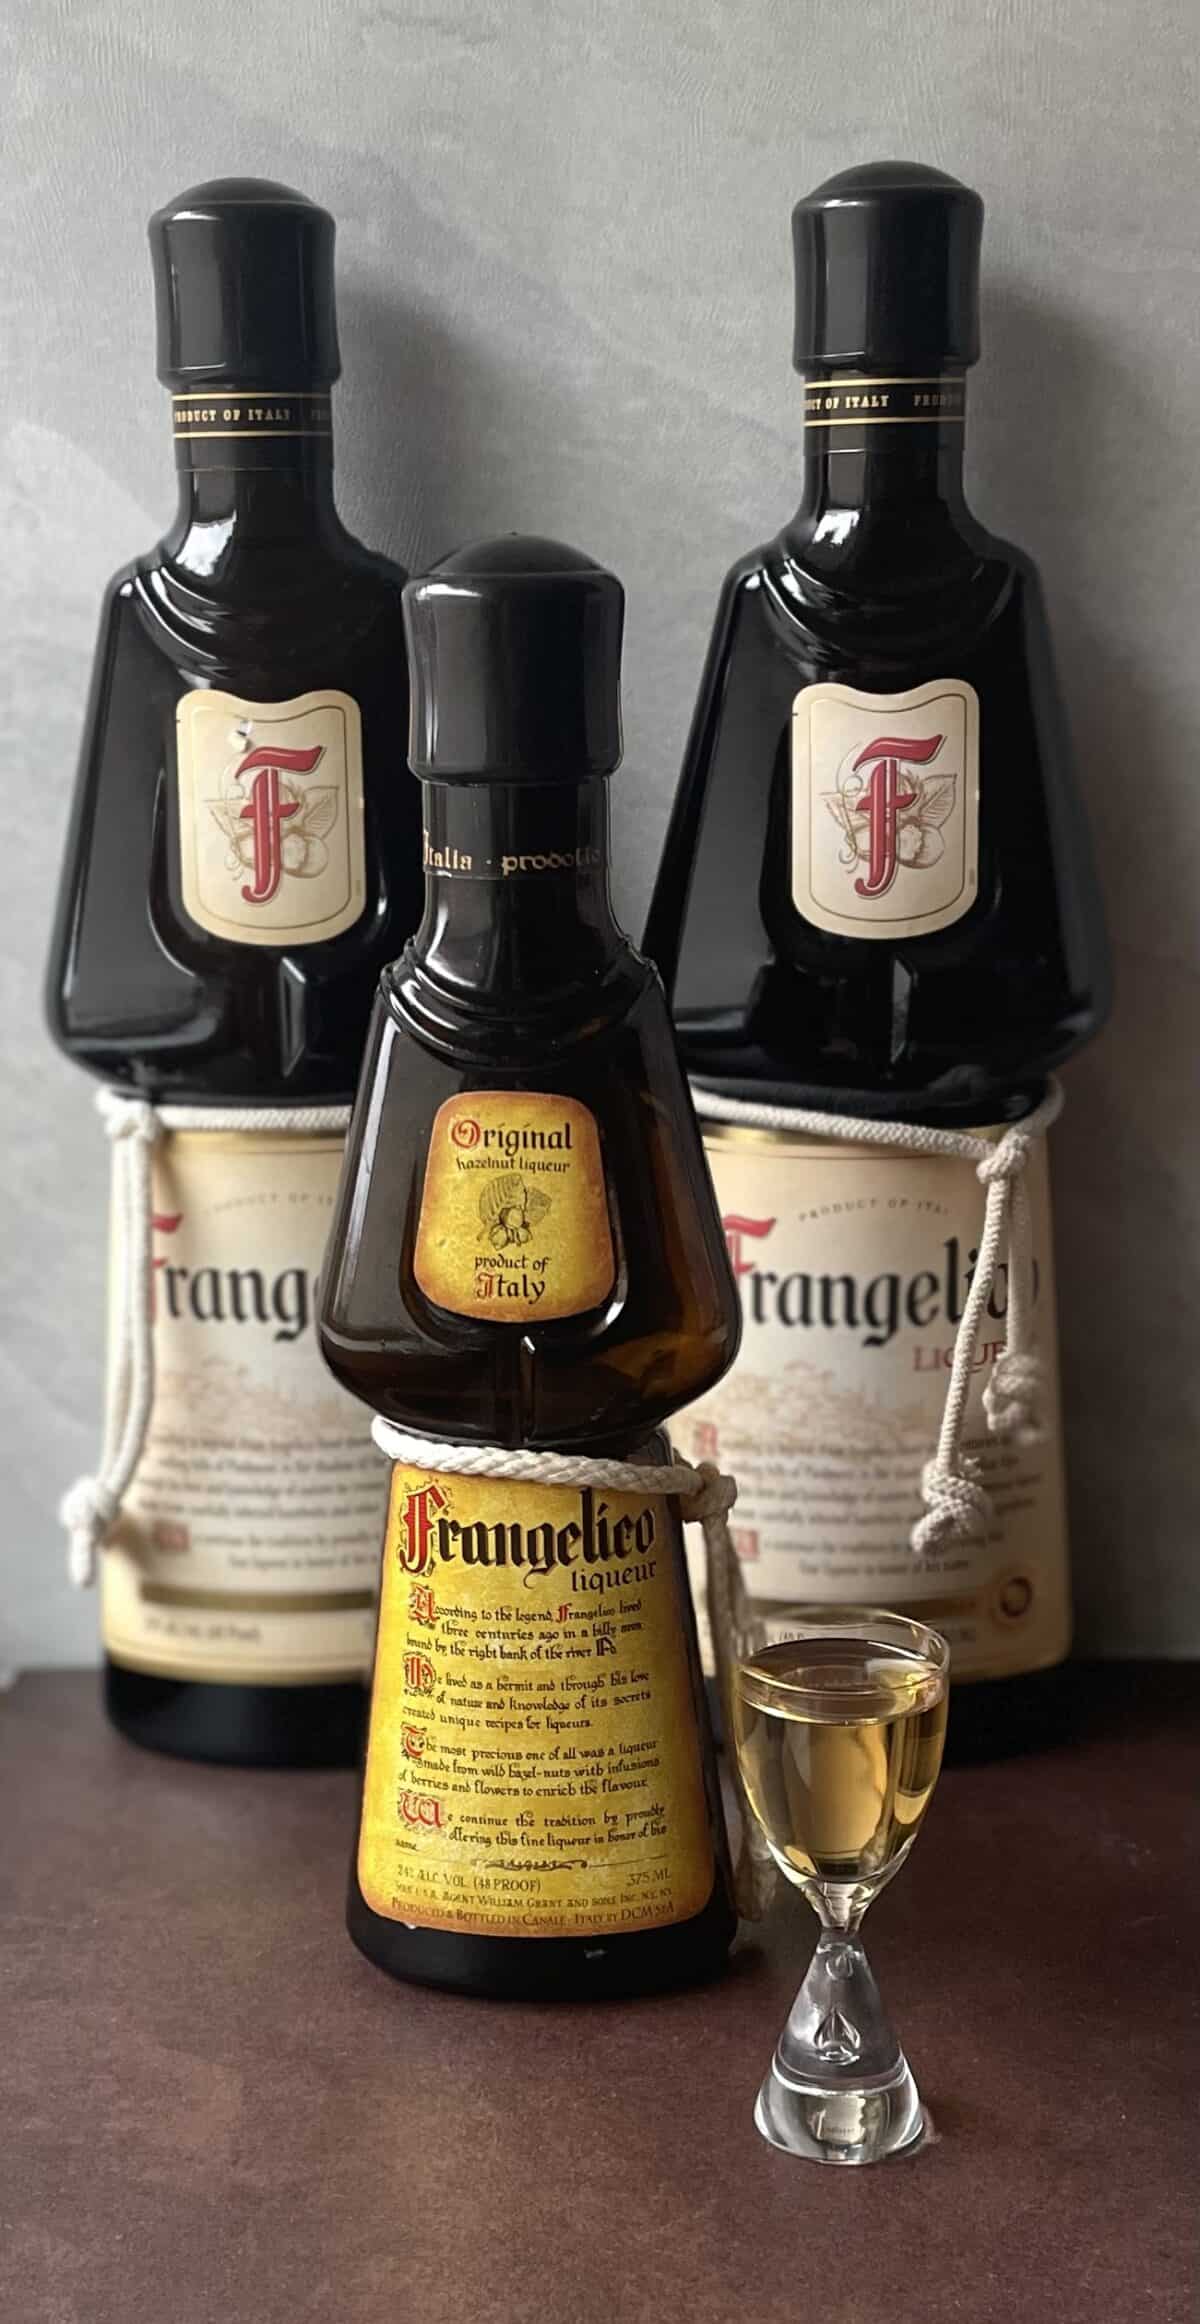 two large bottles of frangelico, a small bottle, and a shot of Frangelico.